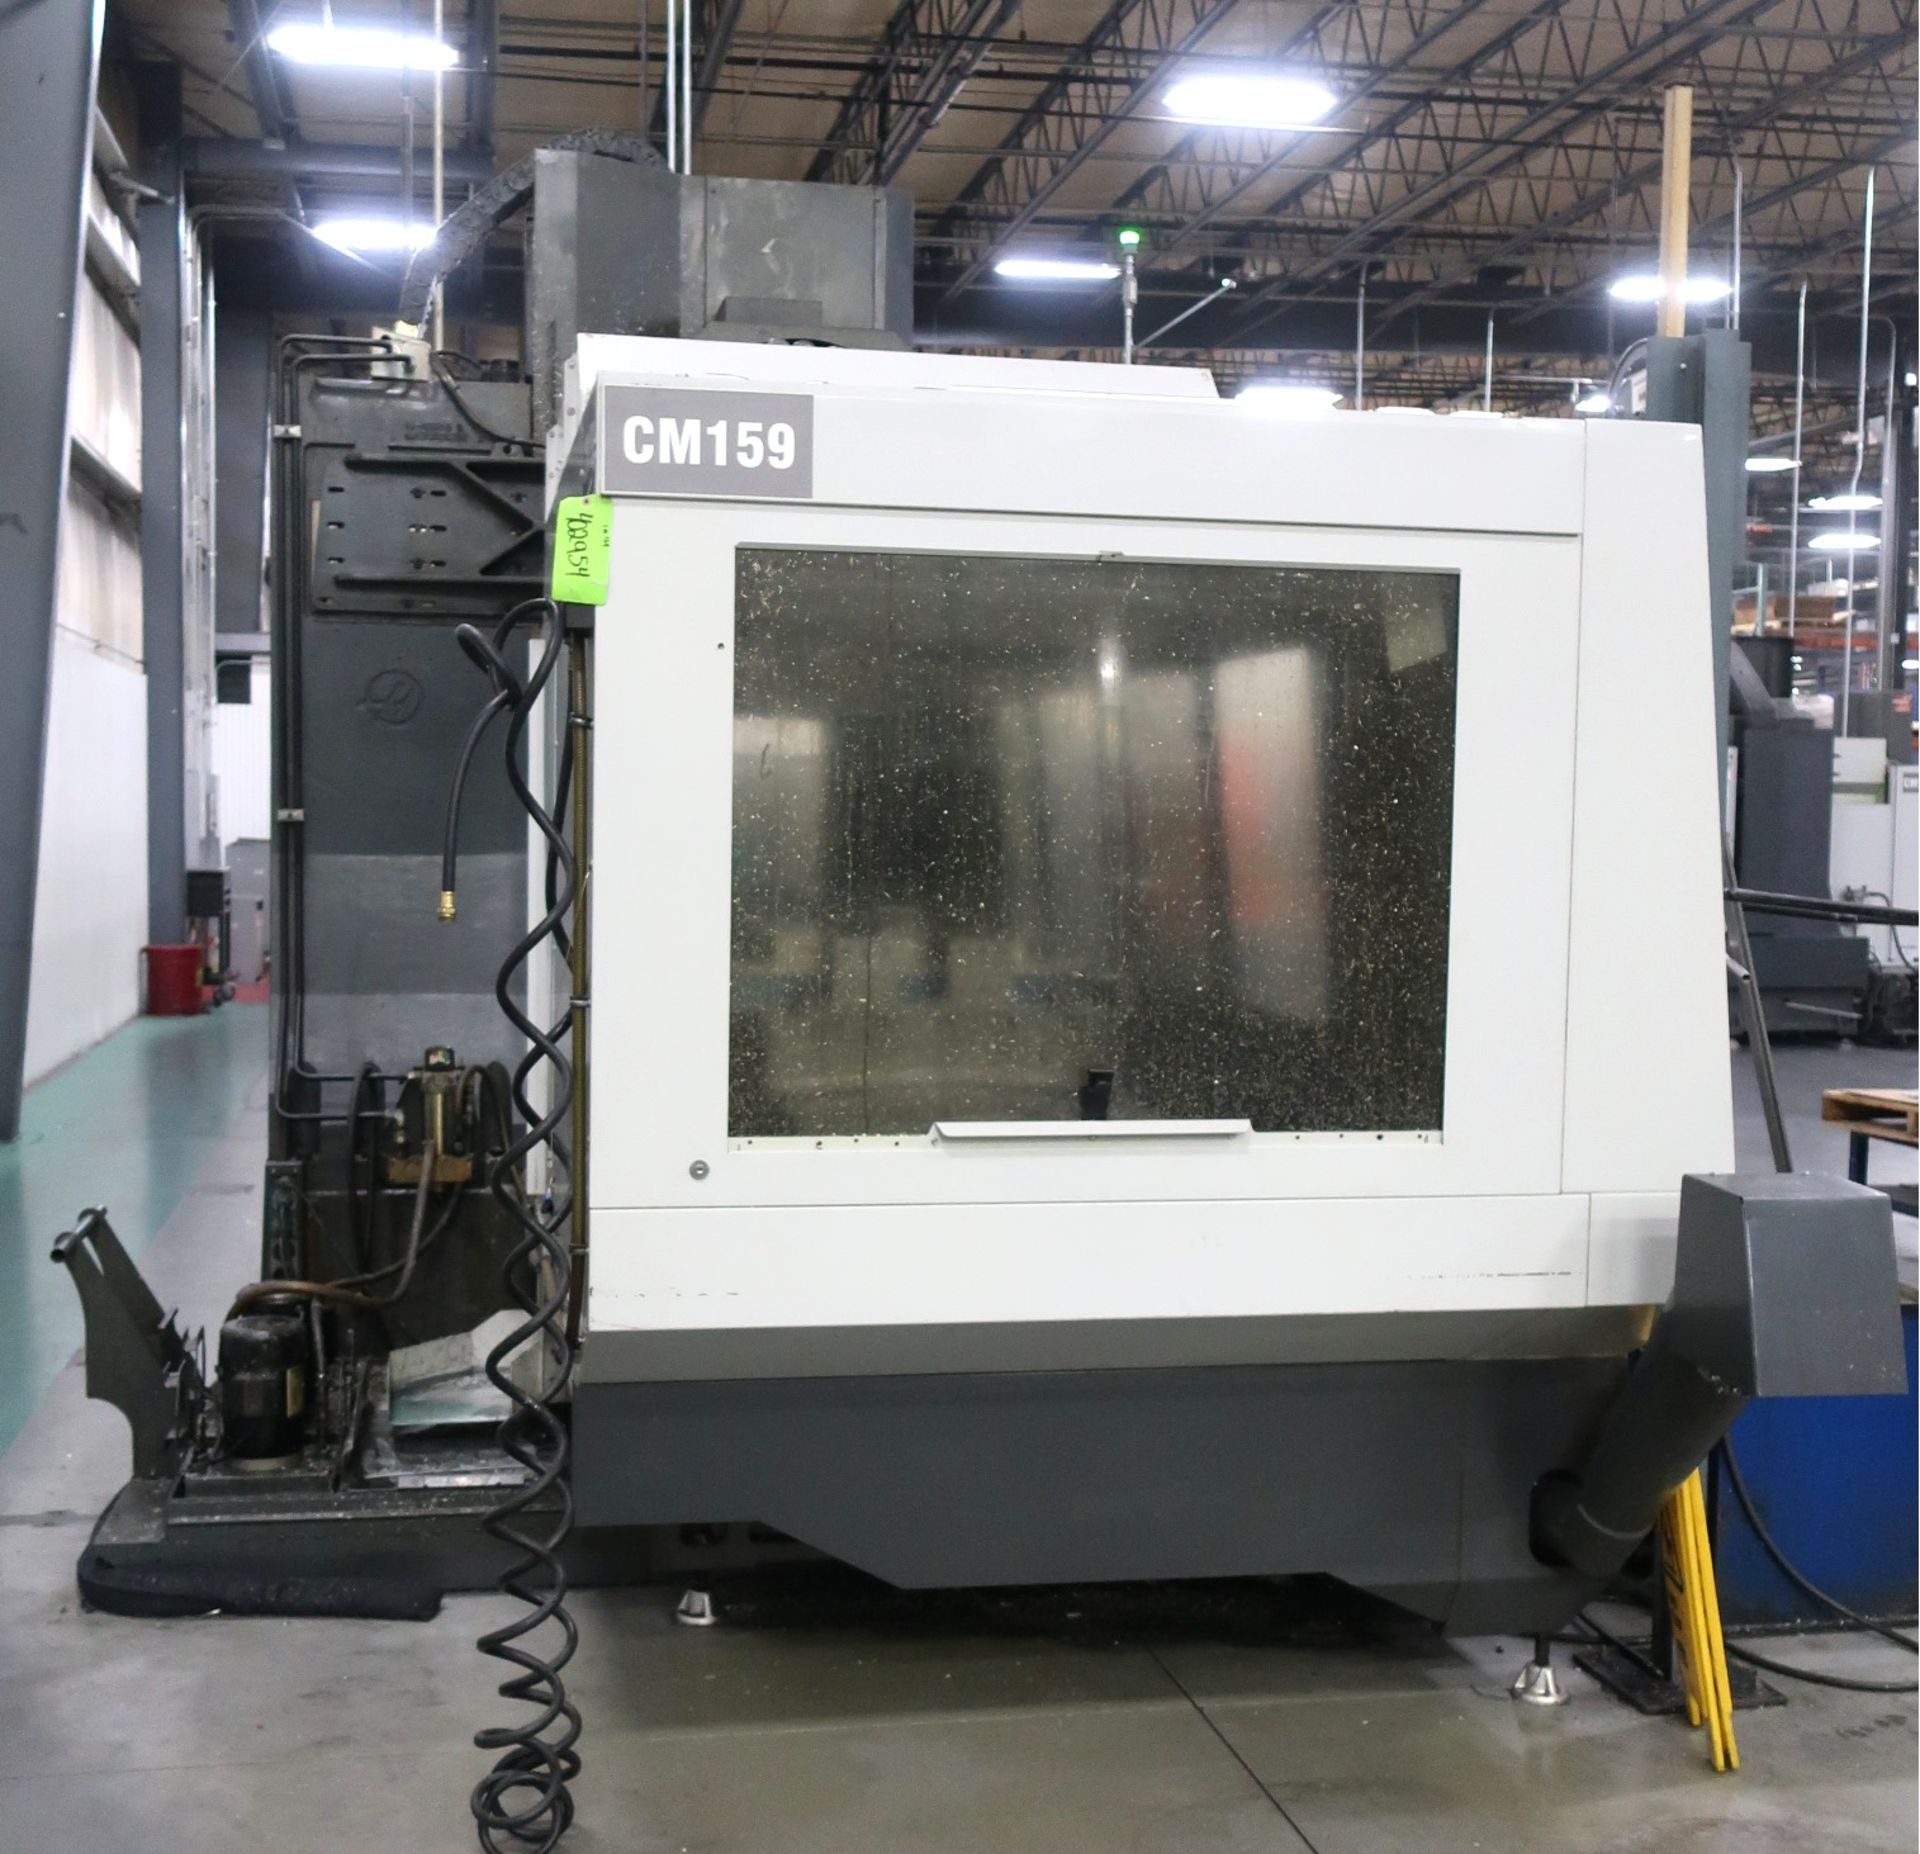 28" x 120" HAAS VF10/40 CNC VERTICAL MACHINING CENTER, NEW 2013 - Image 18 of 21